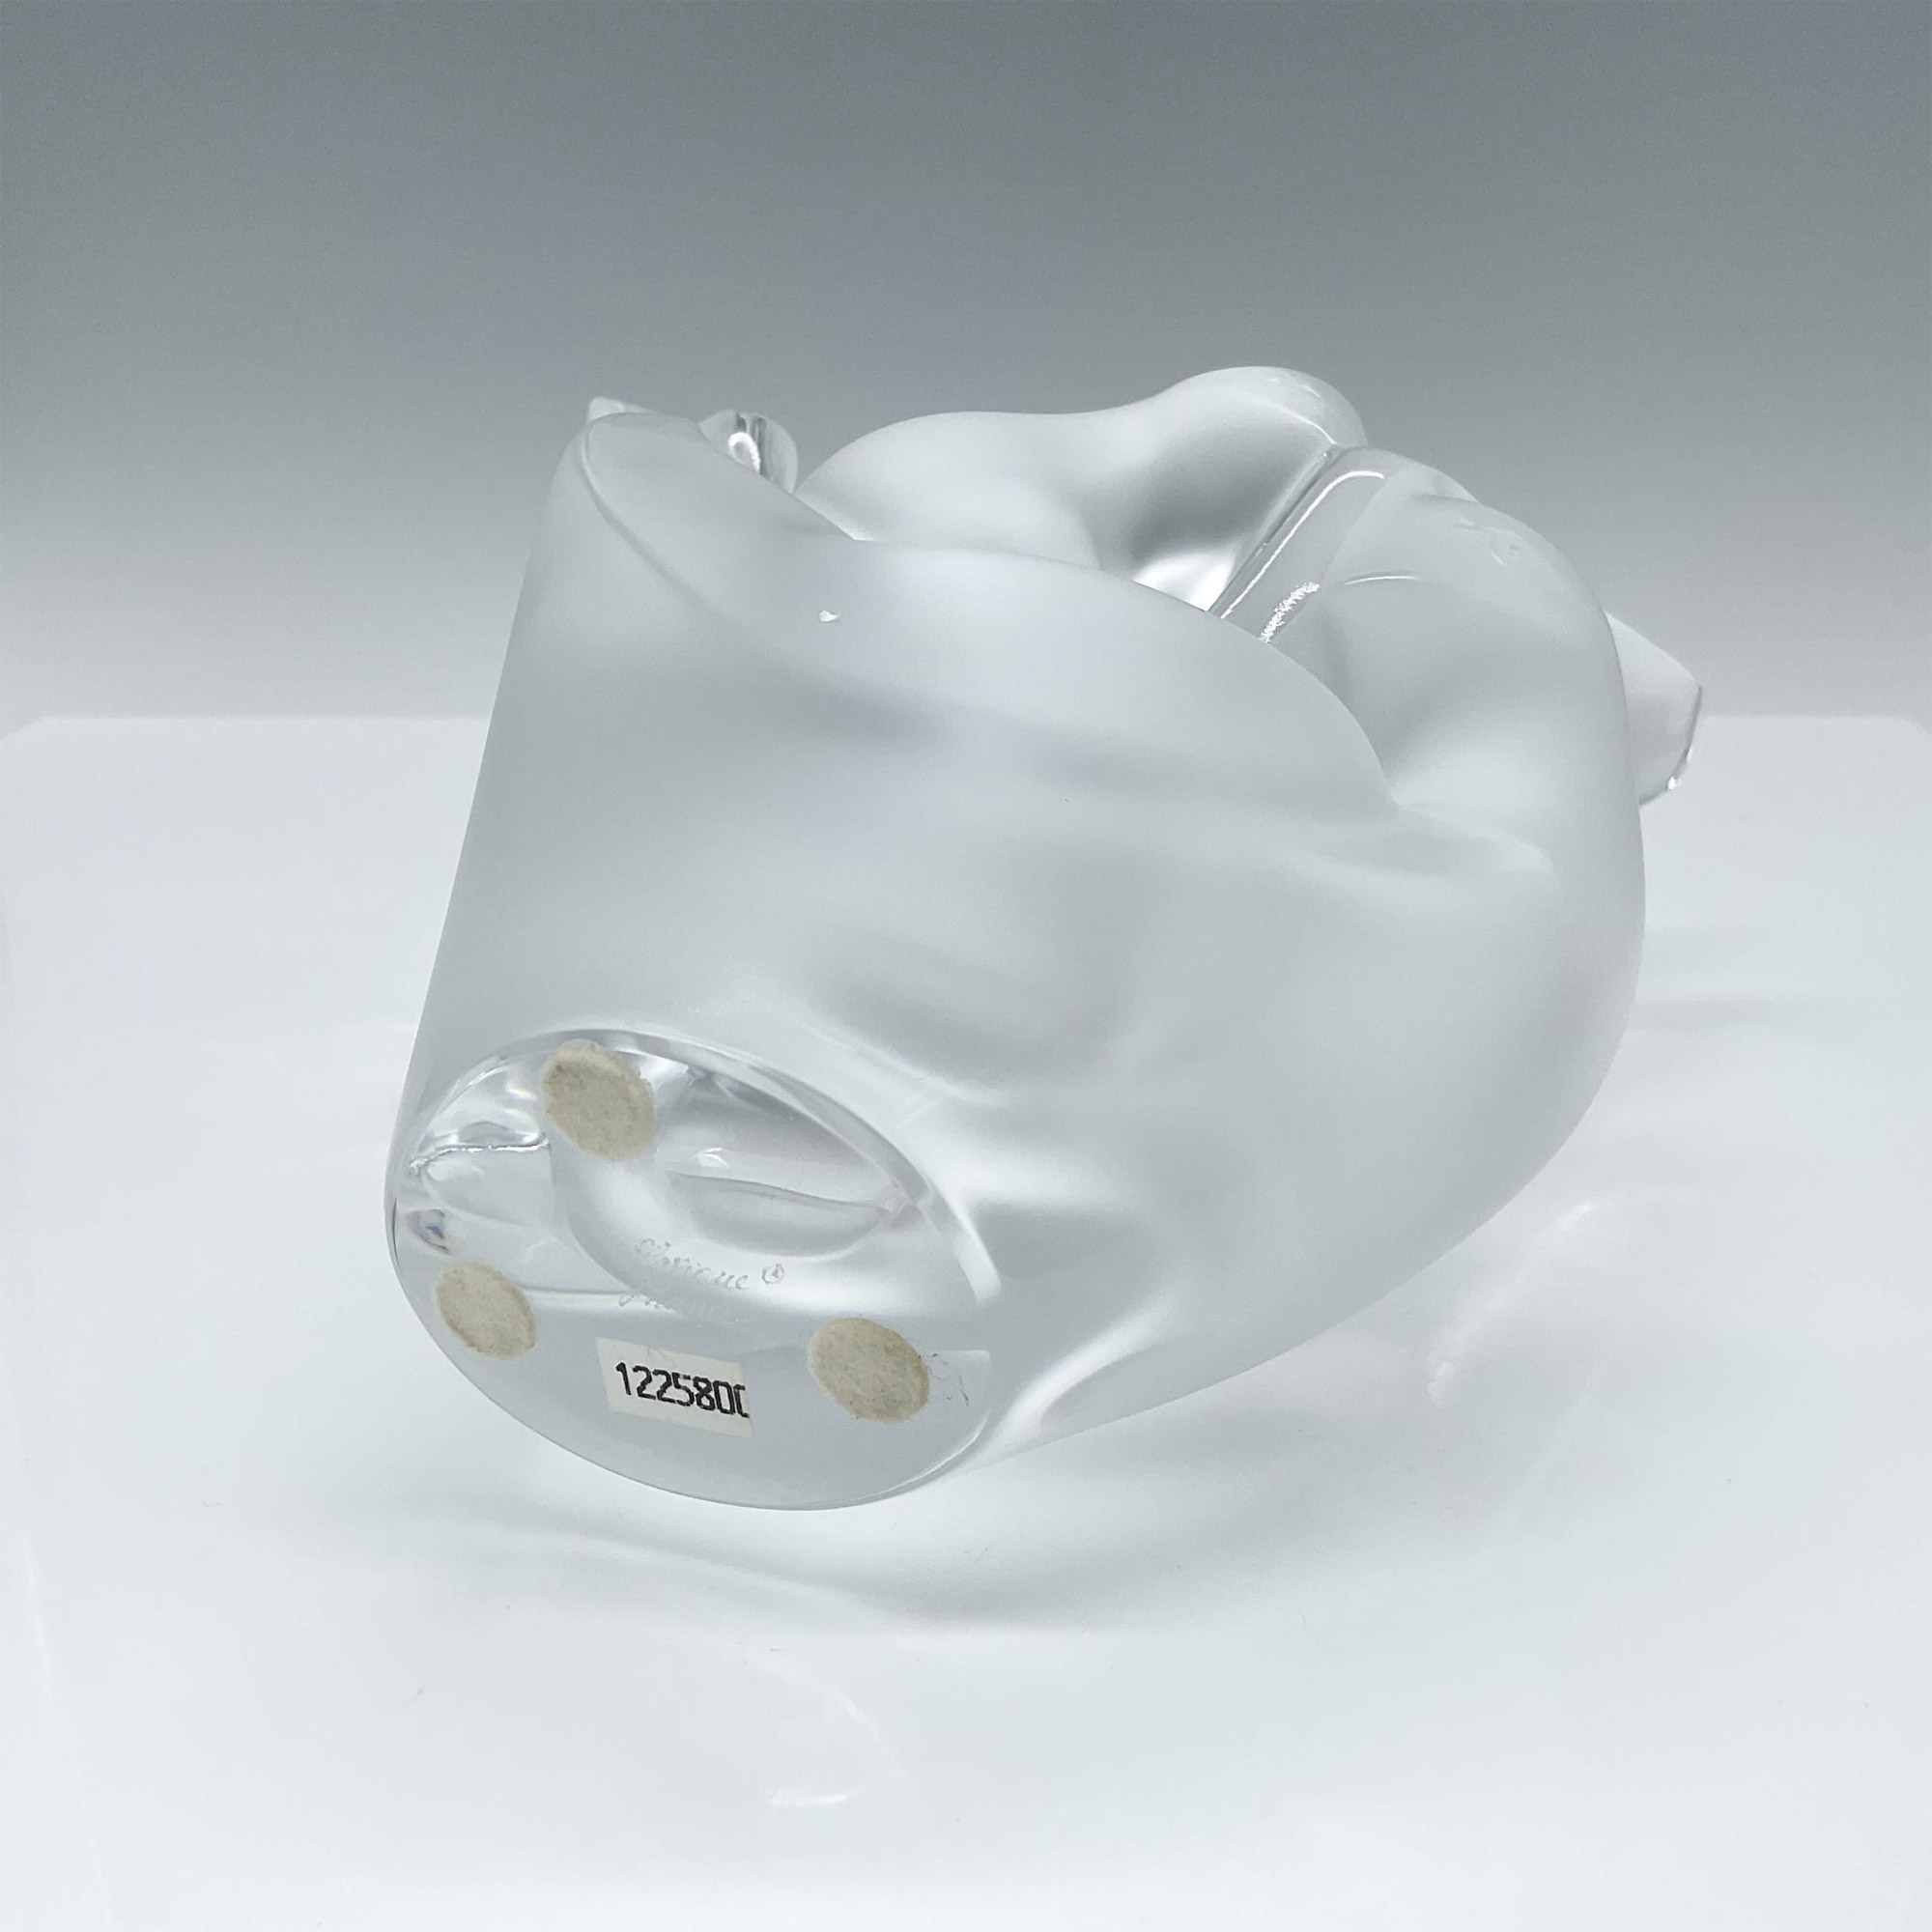 Lalique Crystal Flower Vase with Frog, Dove Pair, Sylvie - Image 4 of 4